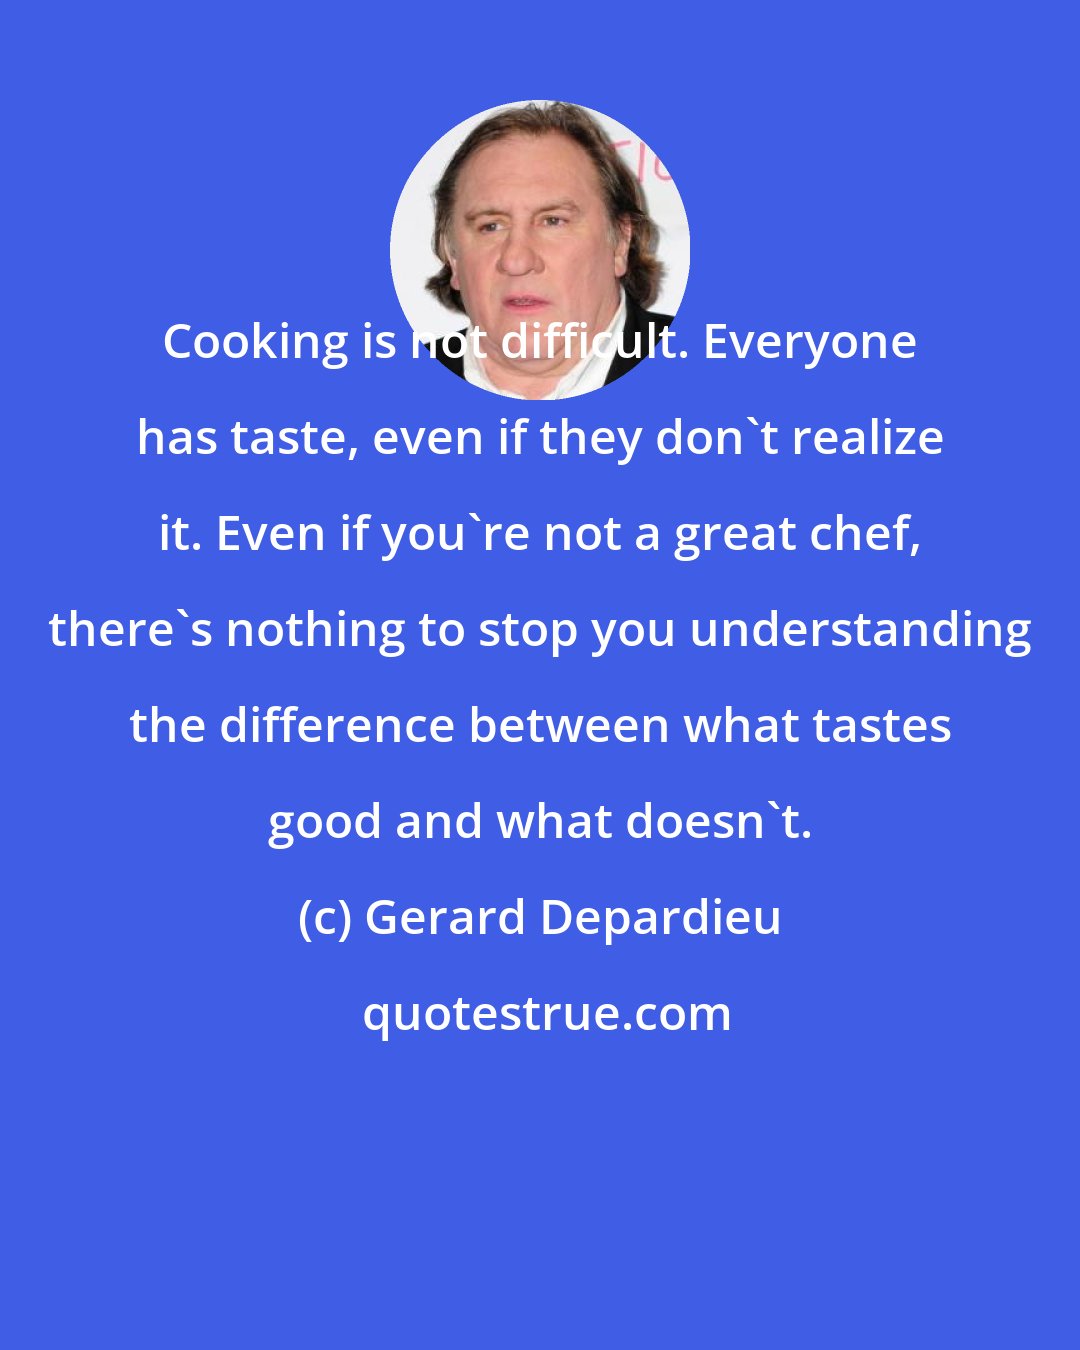 Gerard Depardieu: Cooking is not difficult. Everyone has taste, even if they don't realize it. Even if you're not a great chef, there's nothing to stop you understanding the difference between what tastes good and what doesn't.